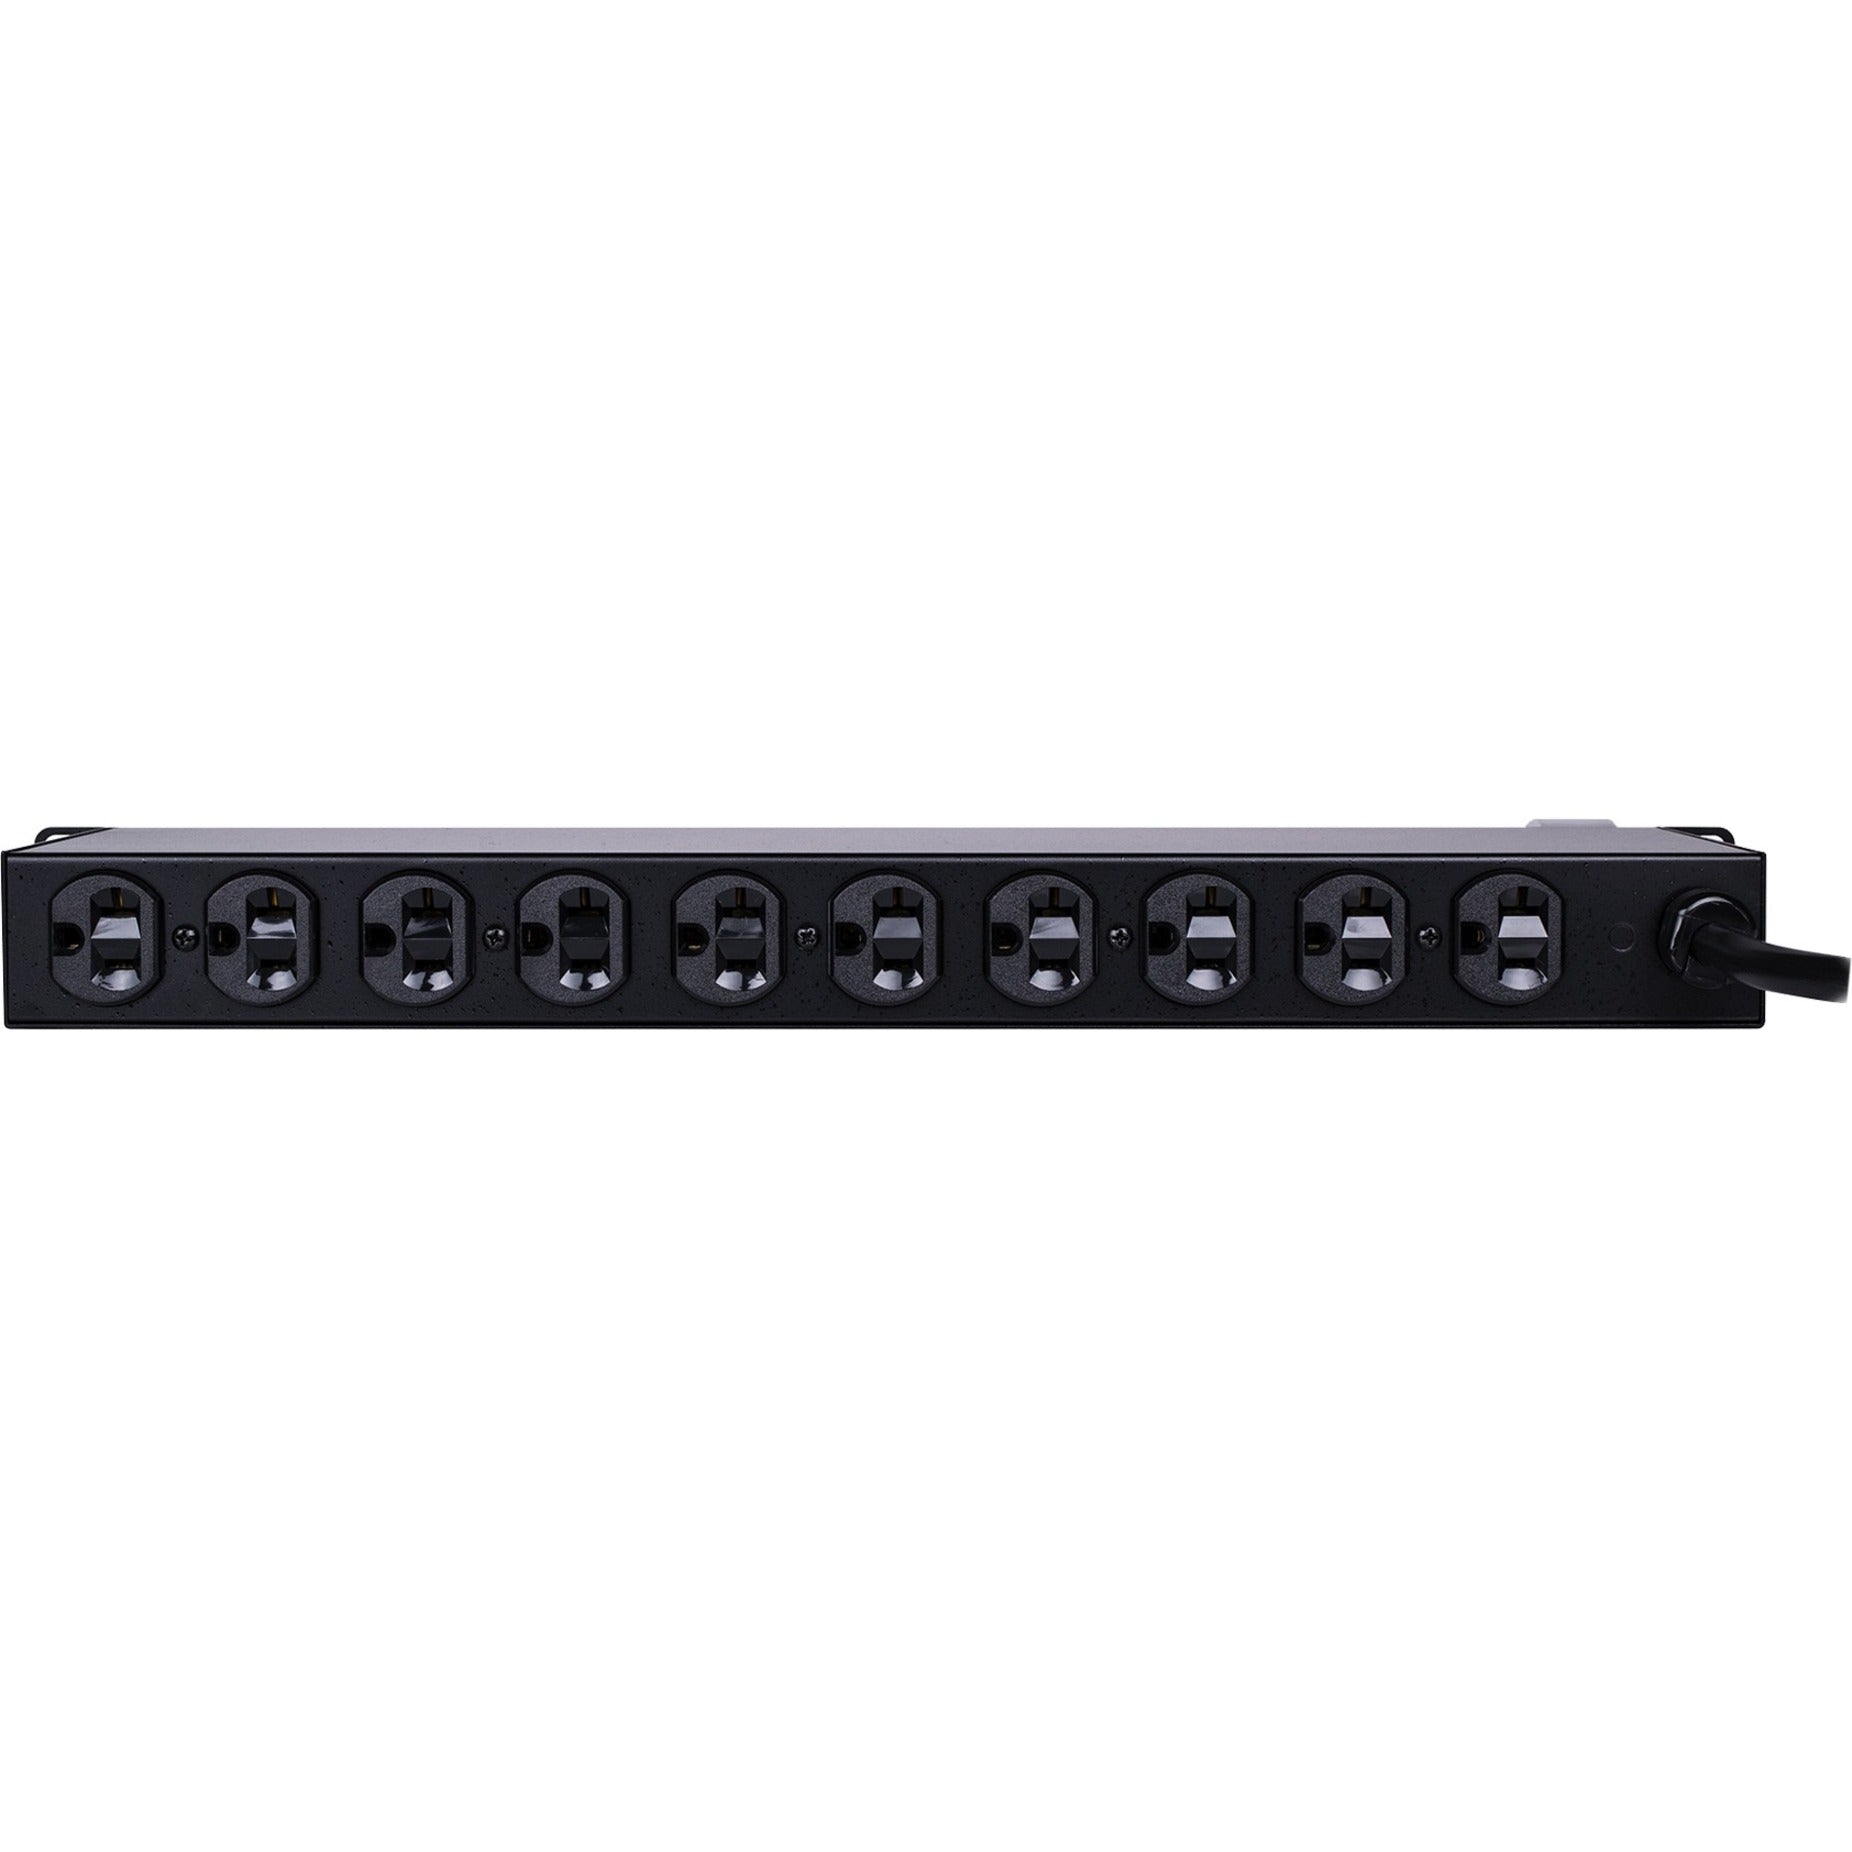 CyberPower CPS-1220RMS Rackmount PDU, 20 Amps, 12 Outlets, Surge Protection